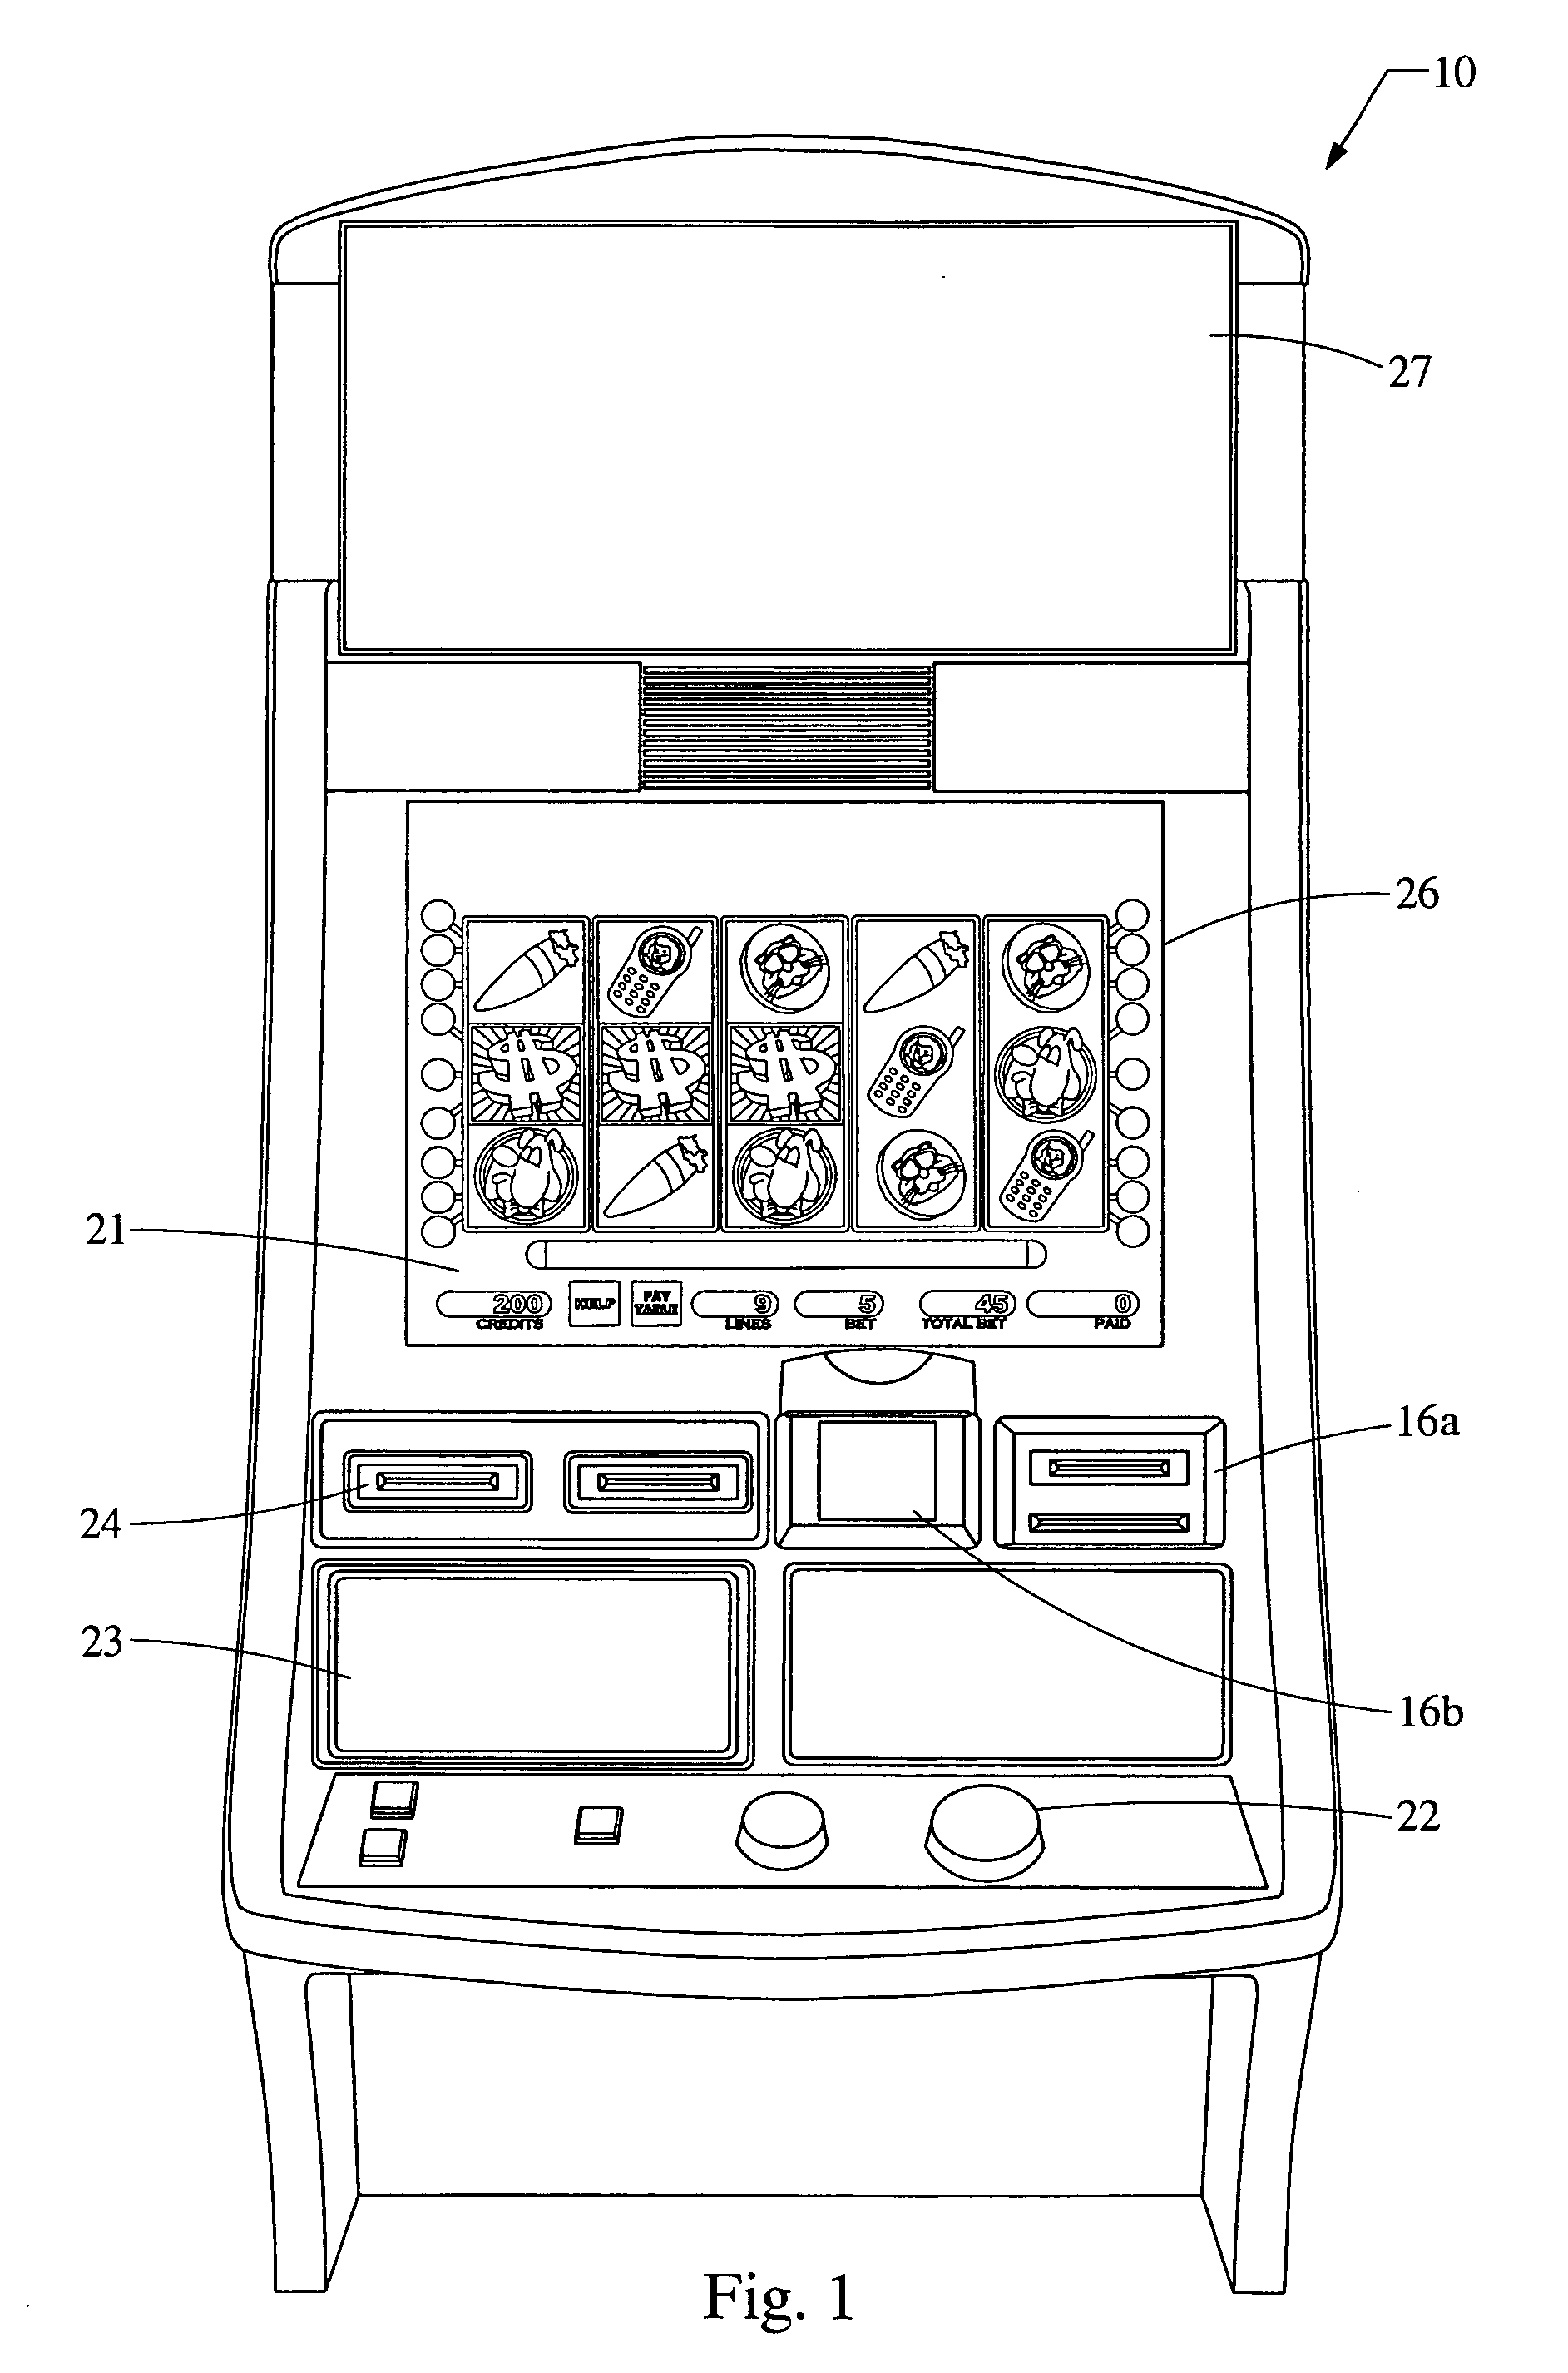 Wagering game with 3D rendering of a mechanical device